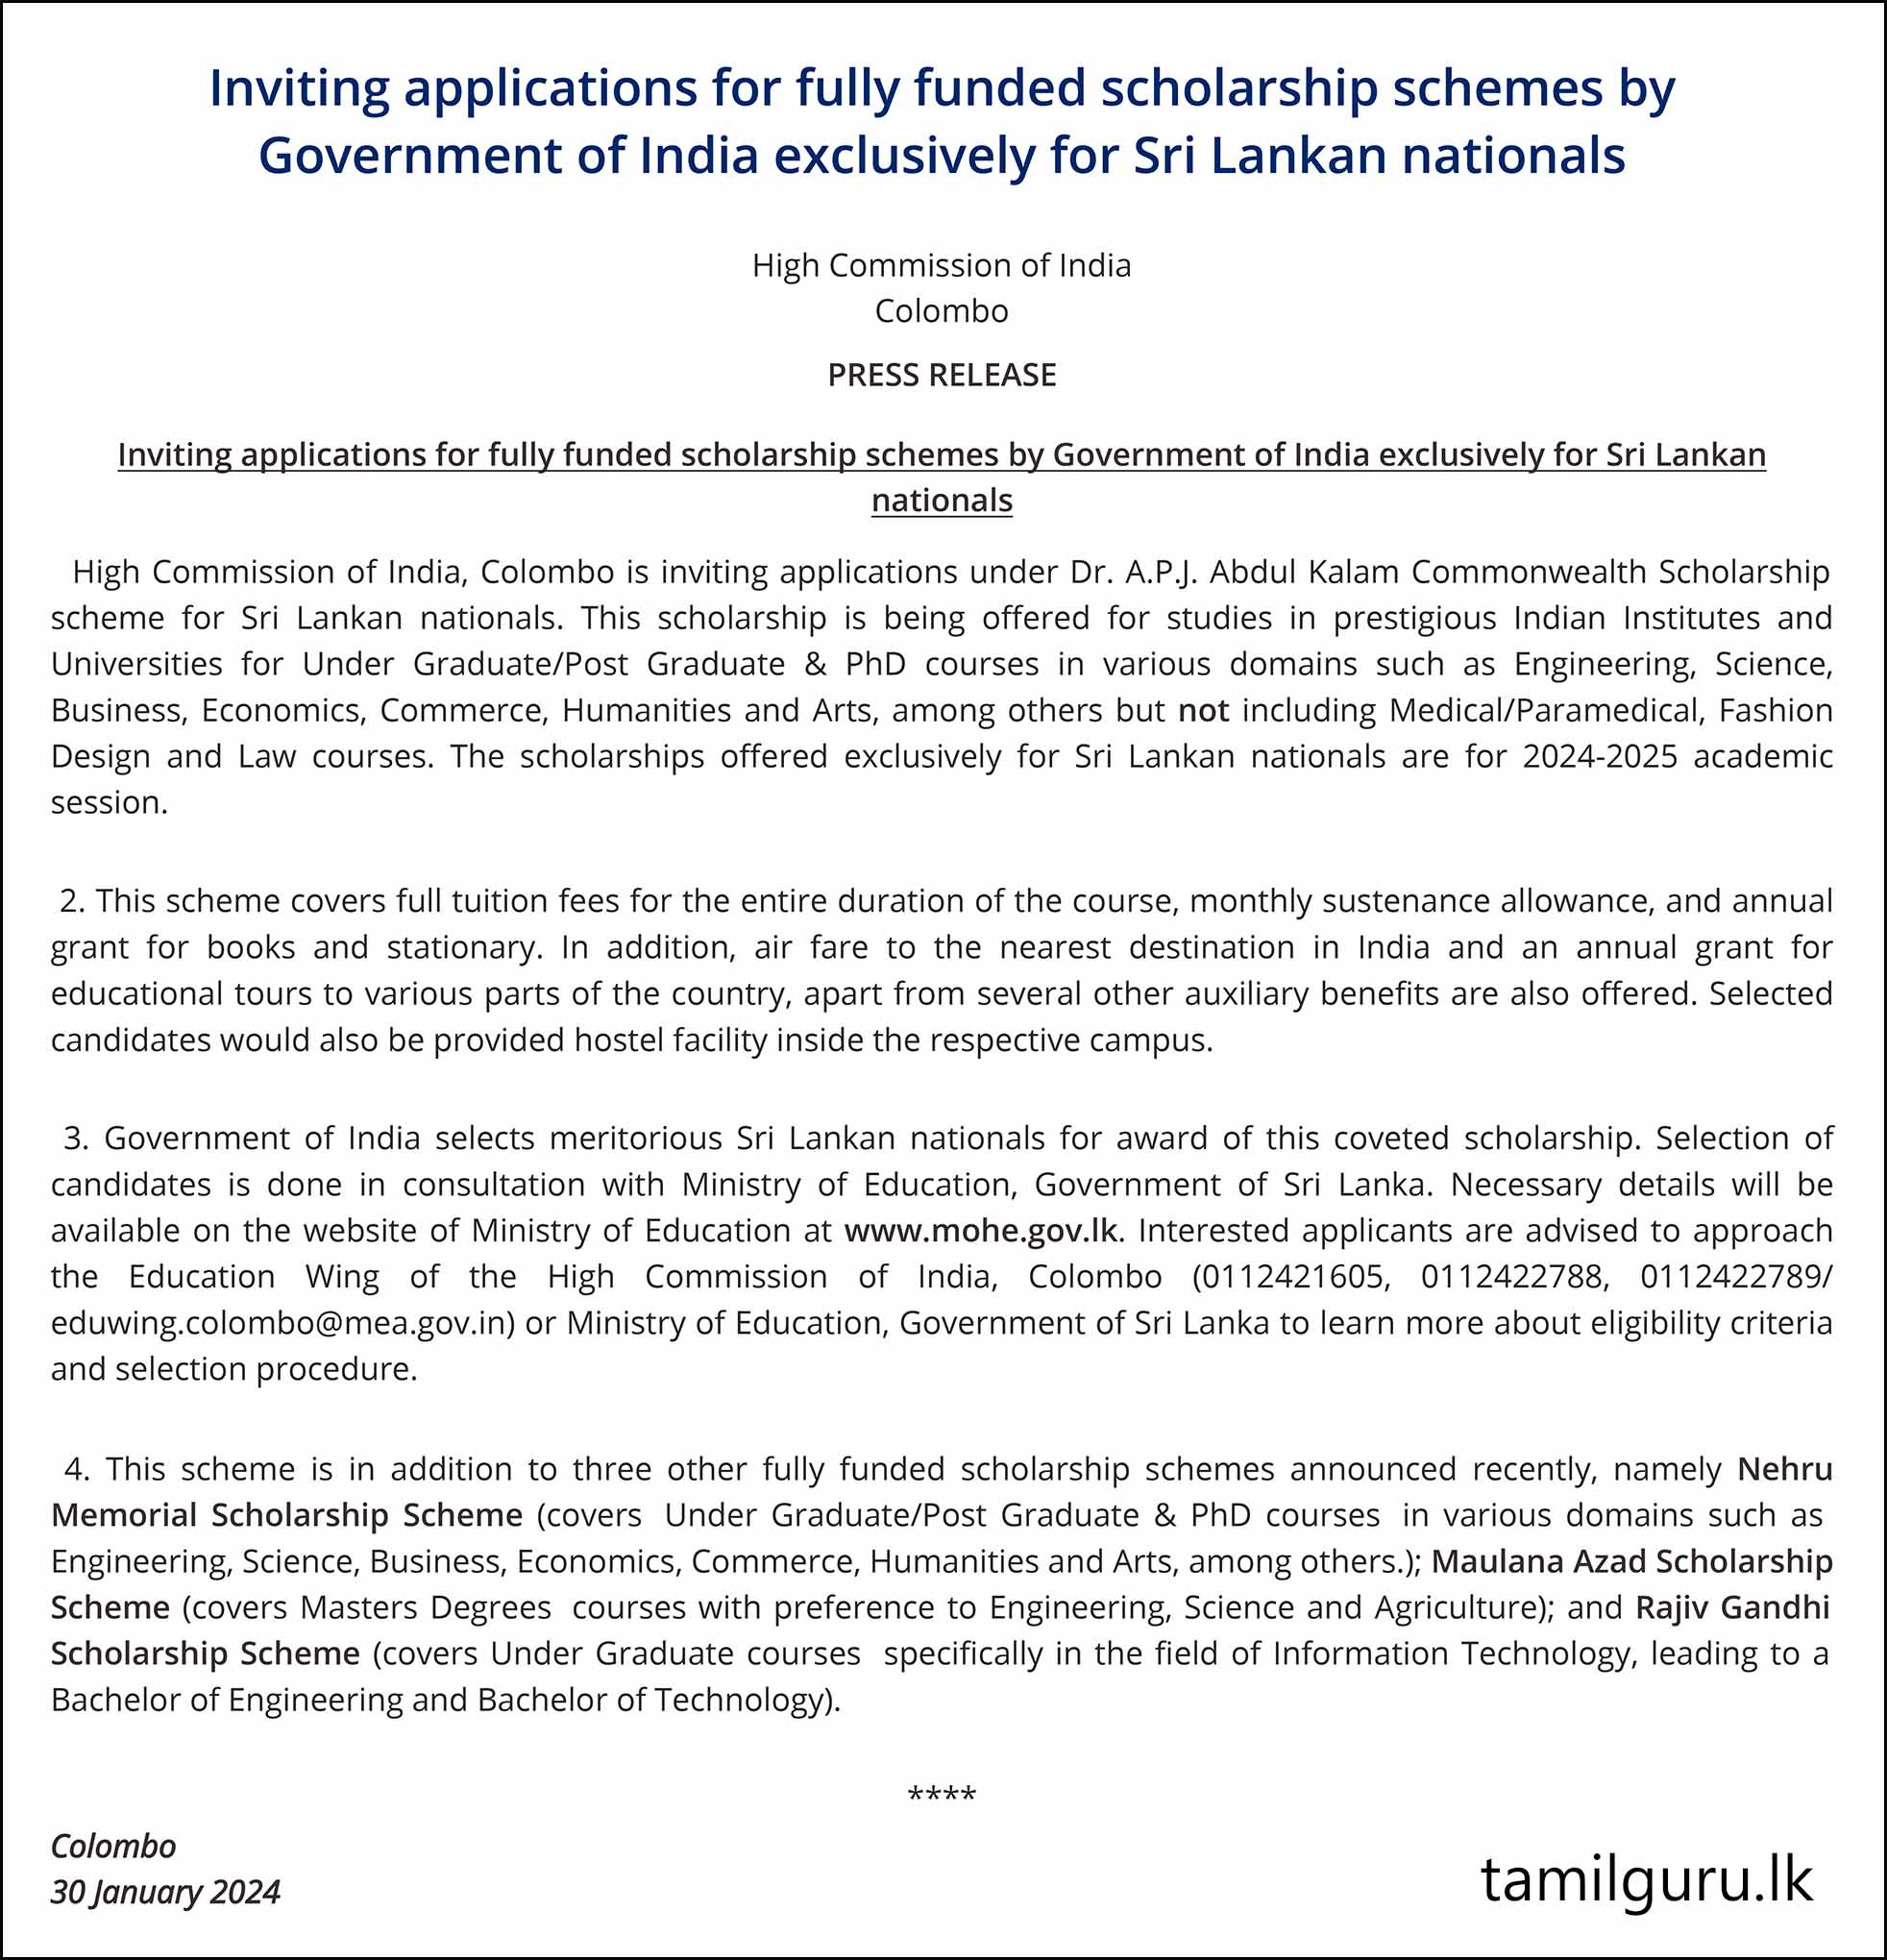 Inviting applications for fully funded scholarship schemes by Government of India exclusively for Sri Lankan nationals
